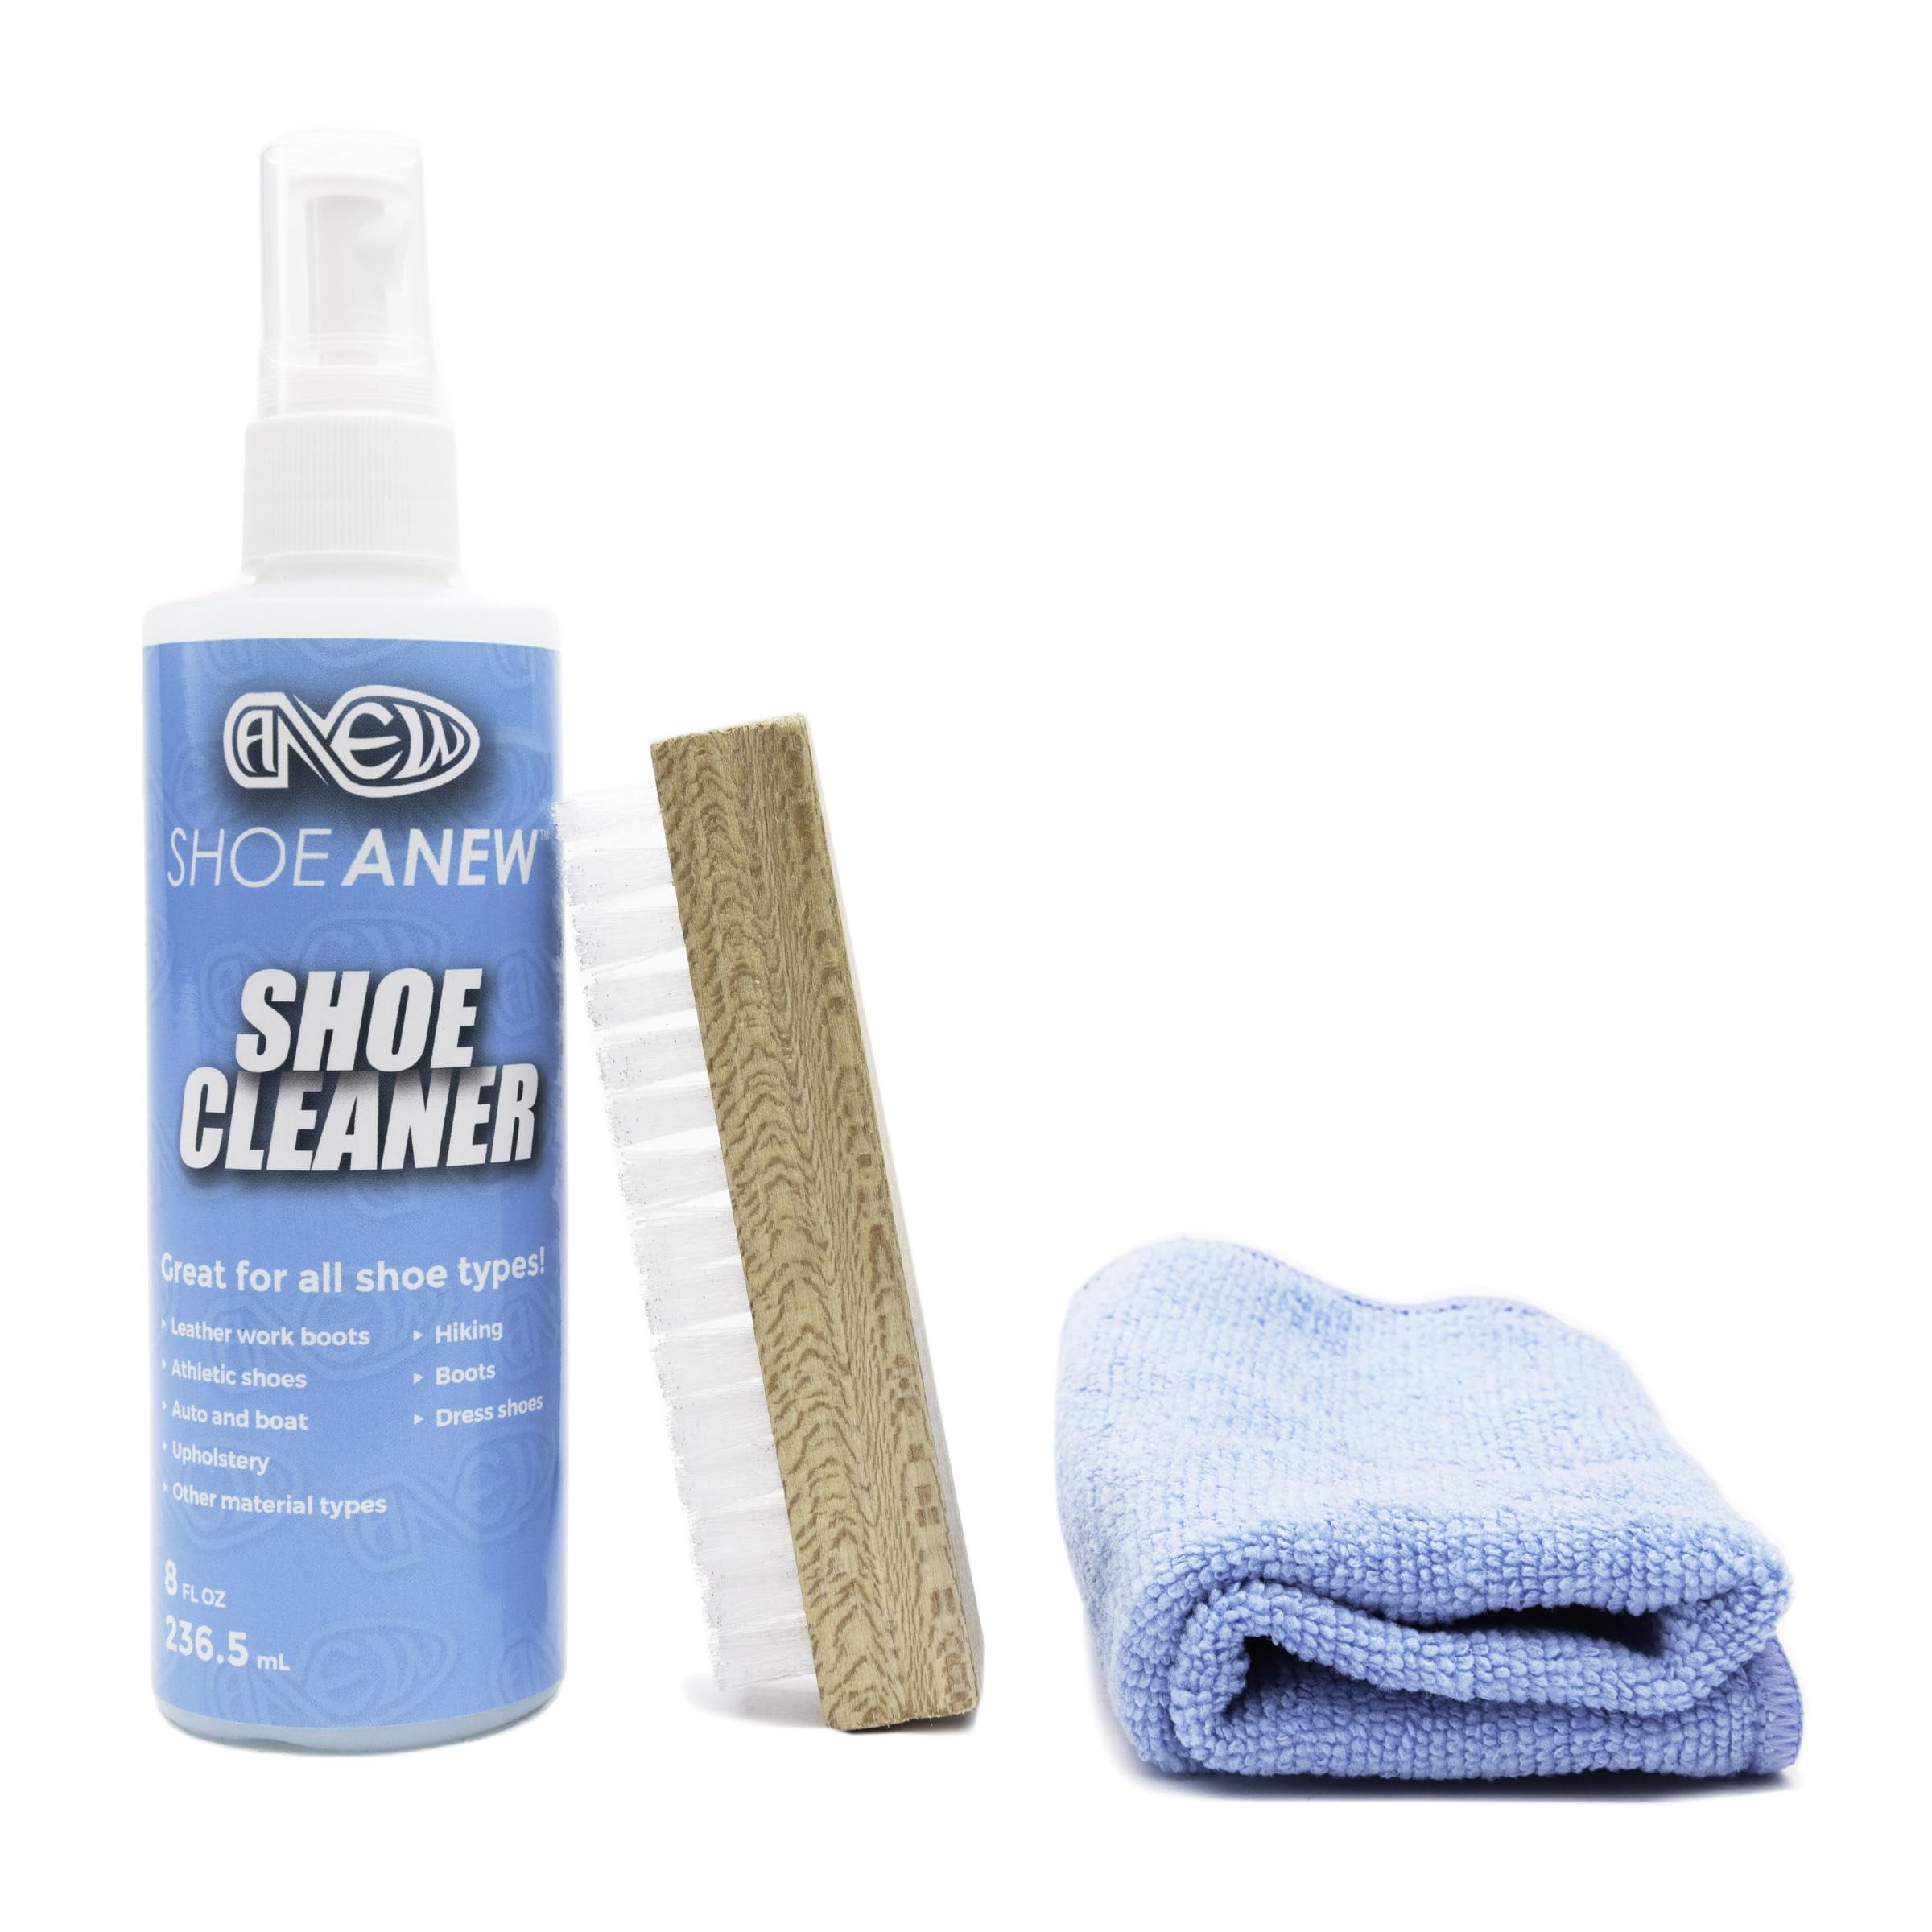 C CELAINER Shoe Cleaner Sneakers Kit 8oz. for White Shoes Suede Mesh Fabric  Canvas & More with 2 Brushes & Microfiber Towel